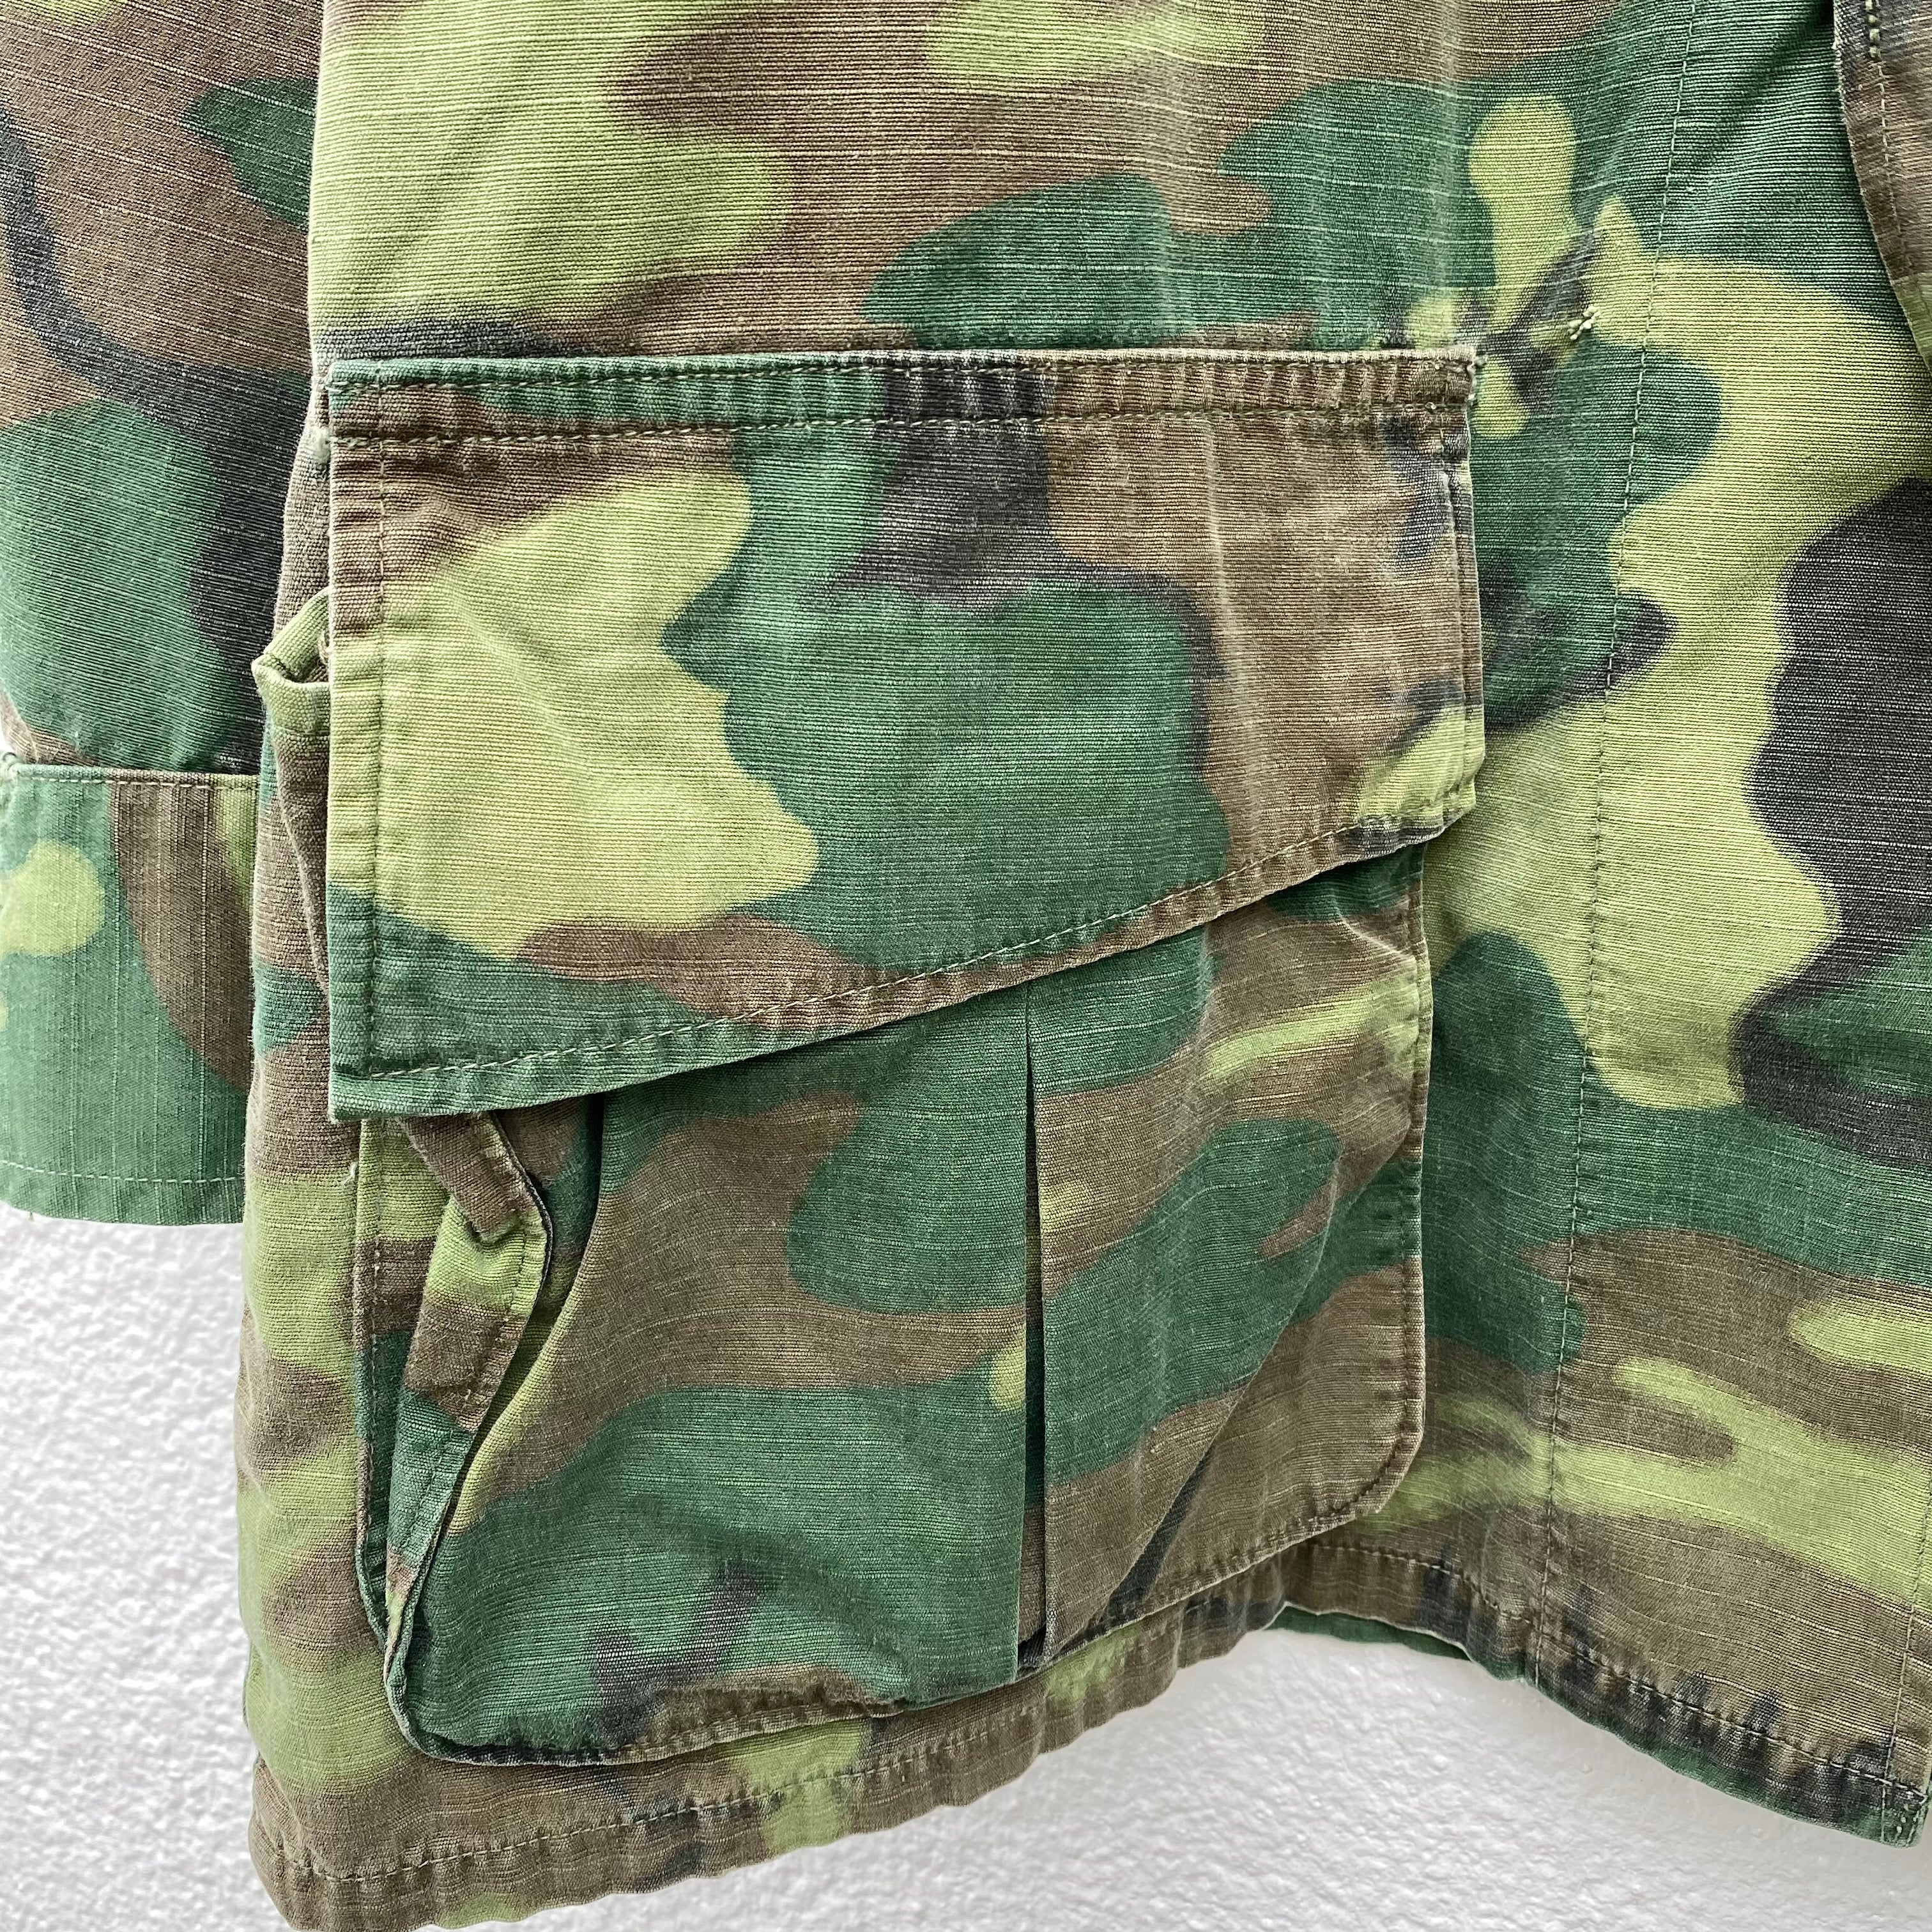 [ ONLY ONE ! ] US ARMED FORCES '69 JUNGLE FATIGUE SHIRT / Mr.Clean Select